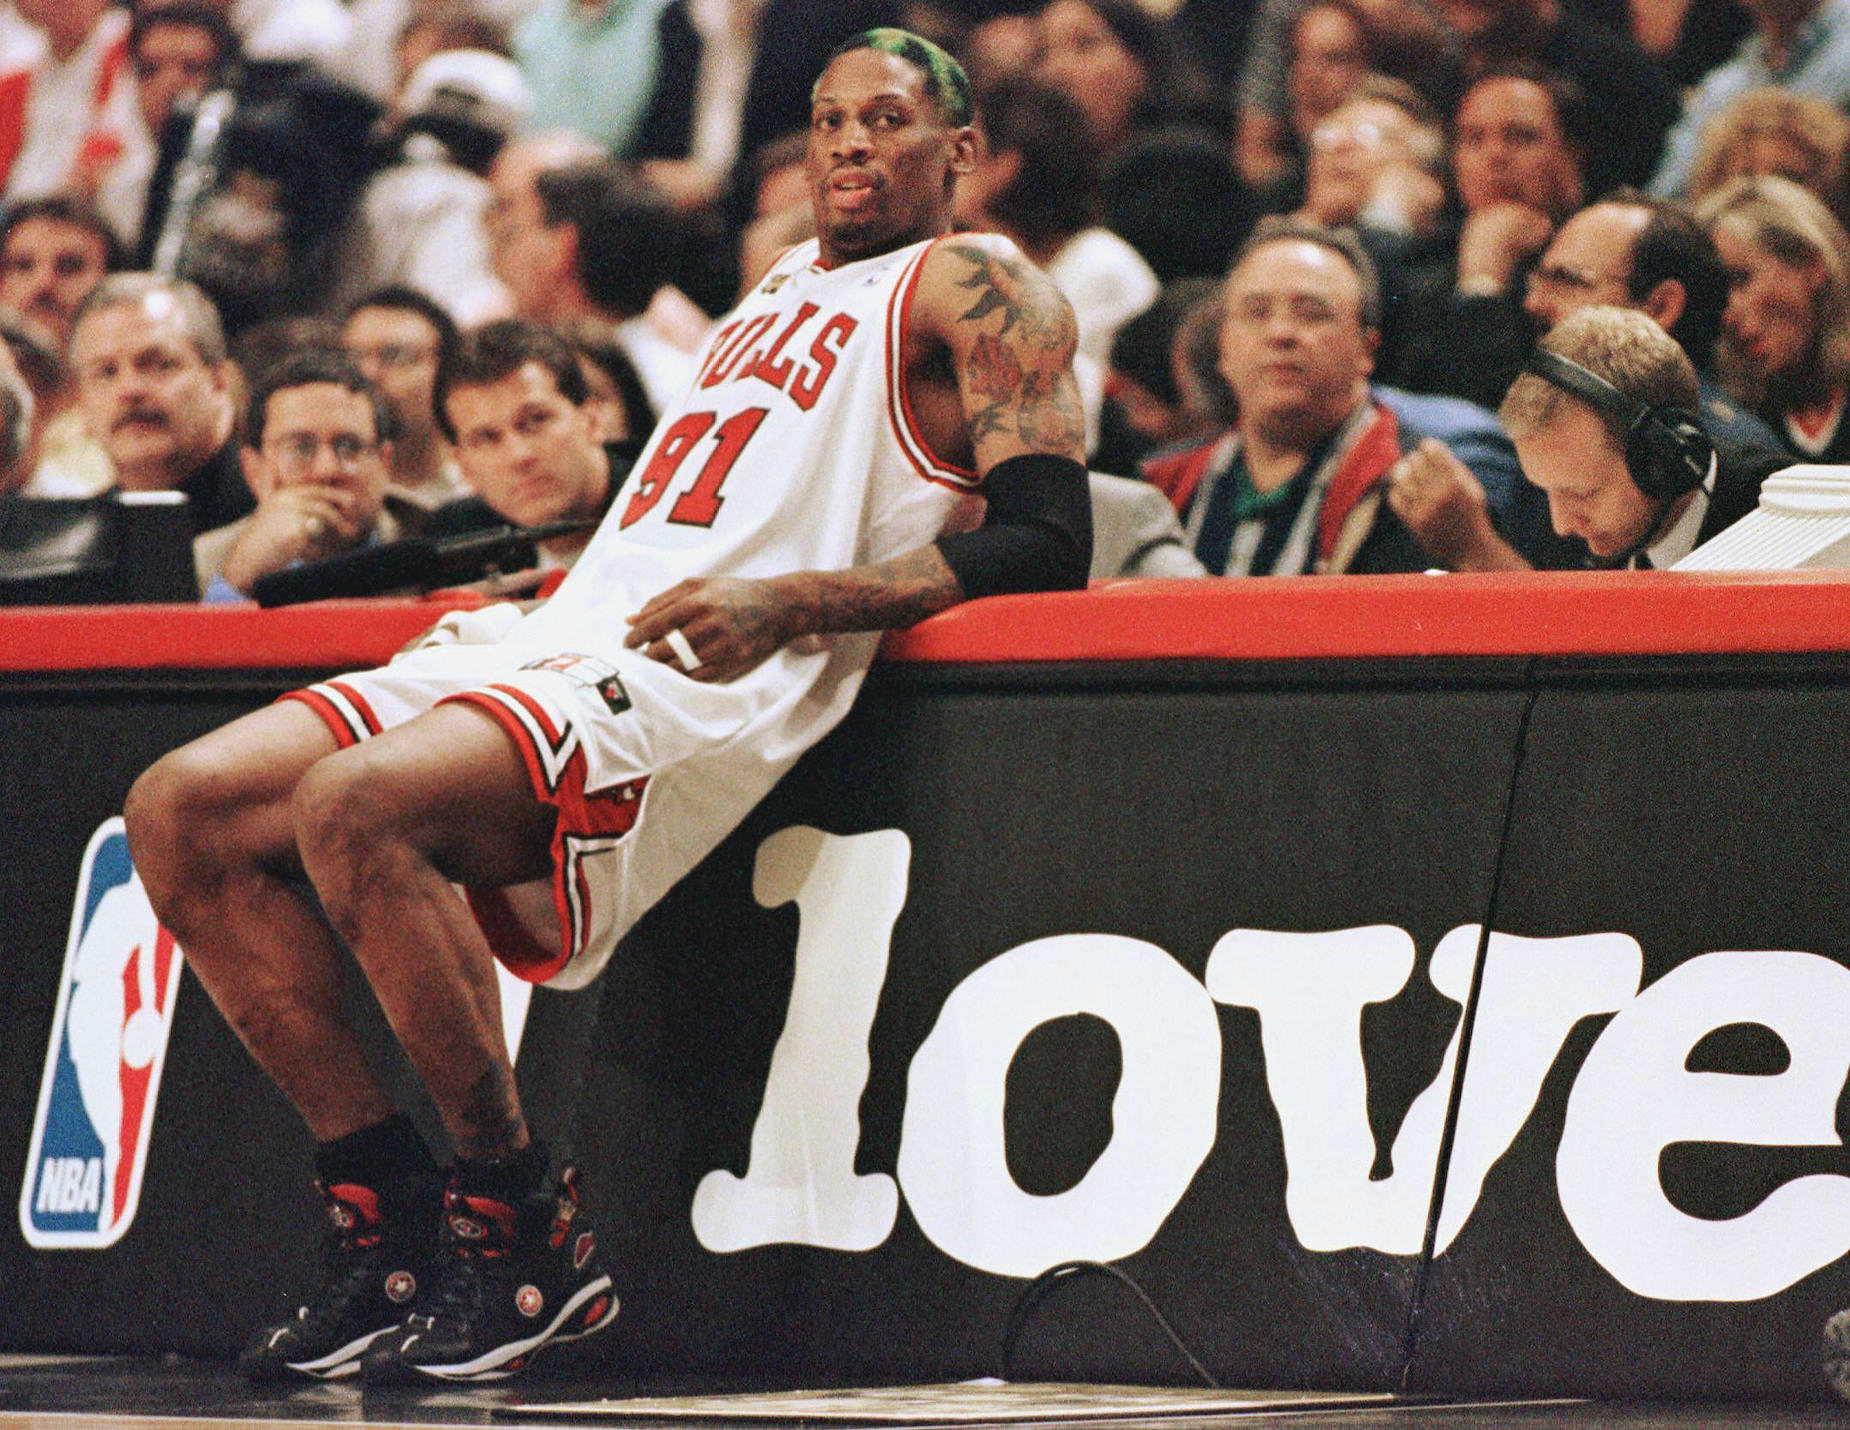 Dennis Rodman stands on the sidelines as a member of the Chicago Bulls.